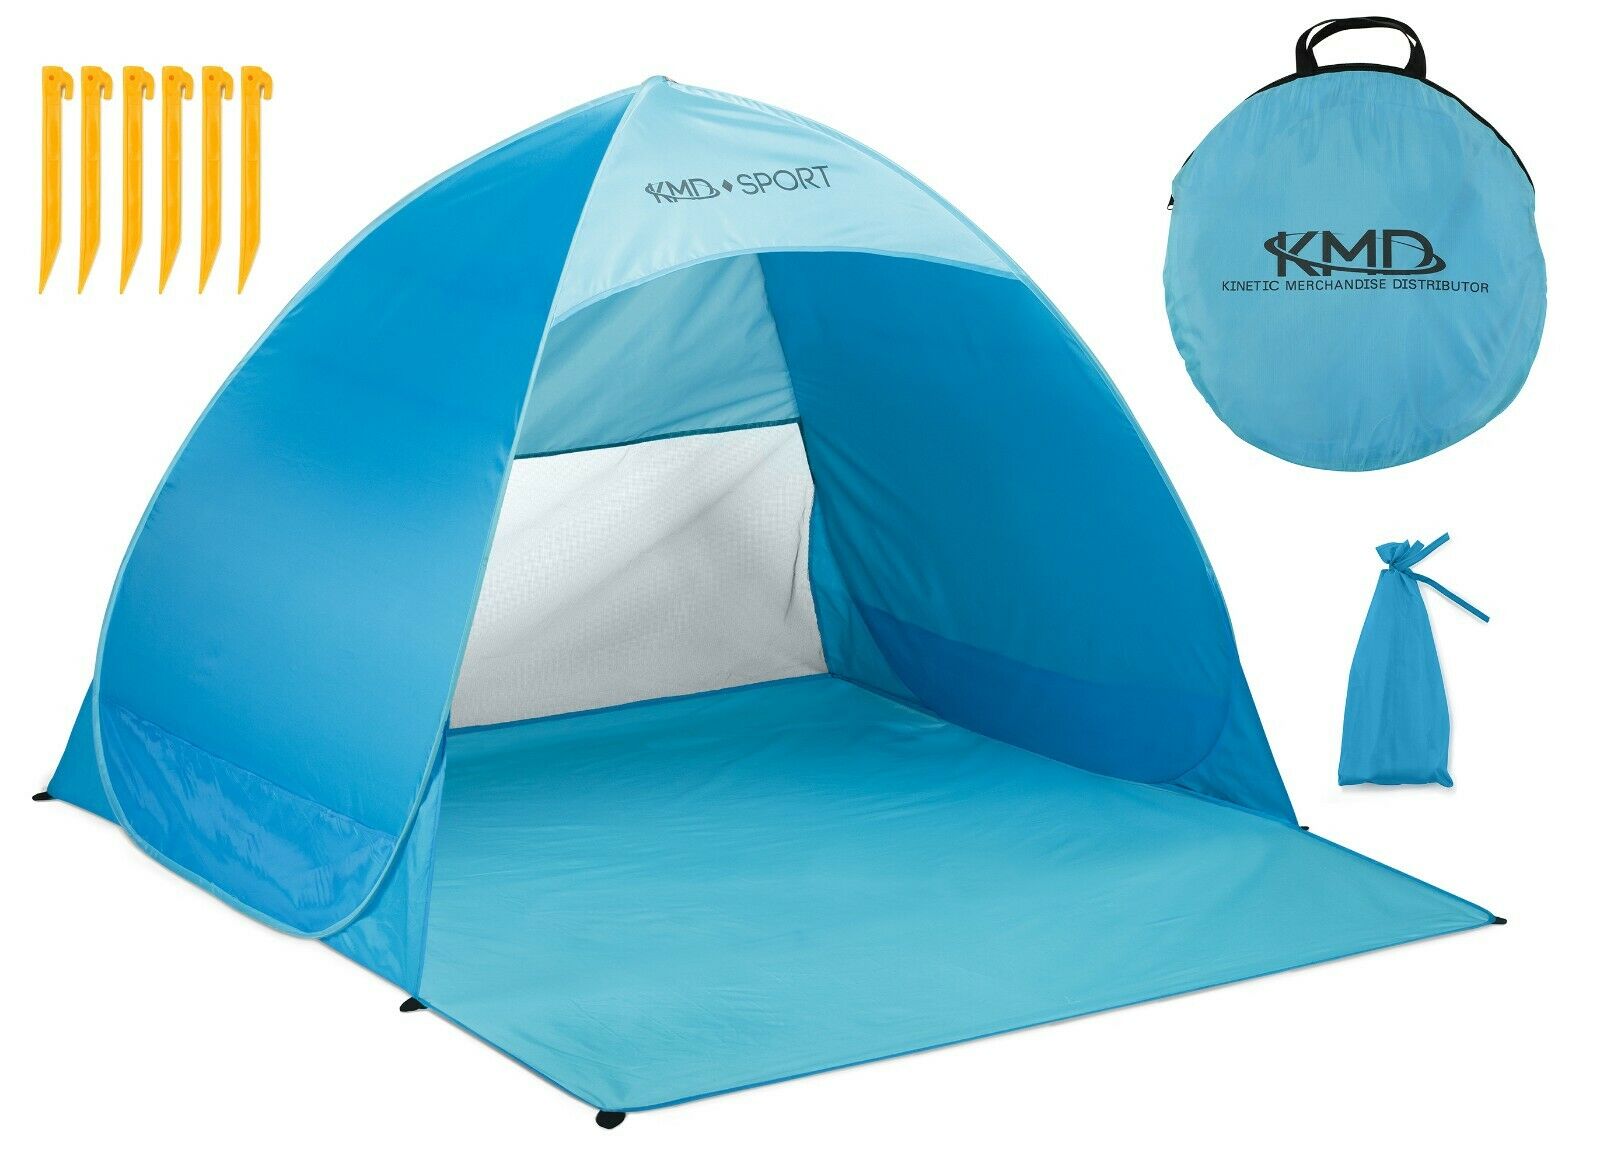 Pop Up Beach Tent Portable Sun Shade Shelter Outdoor Camping Fishing Canopy Blue